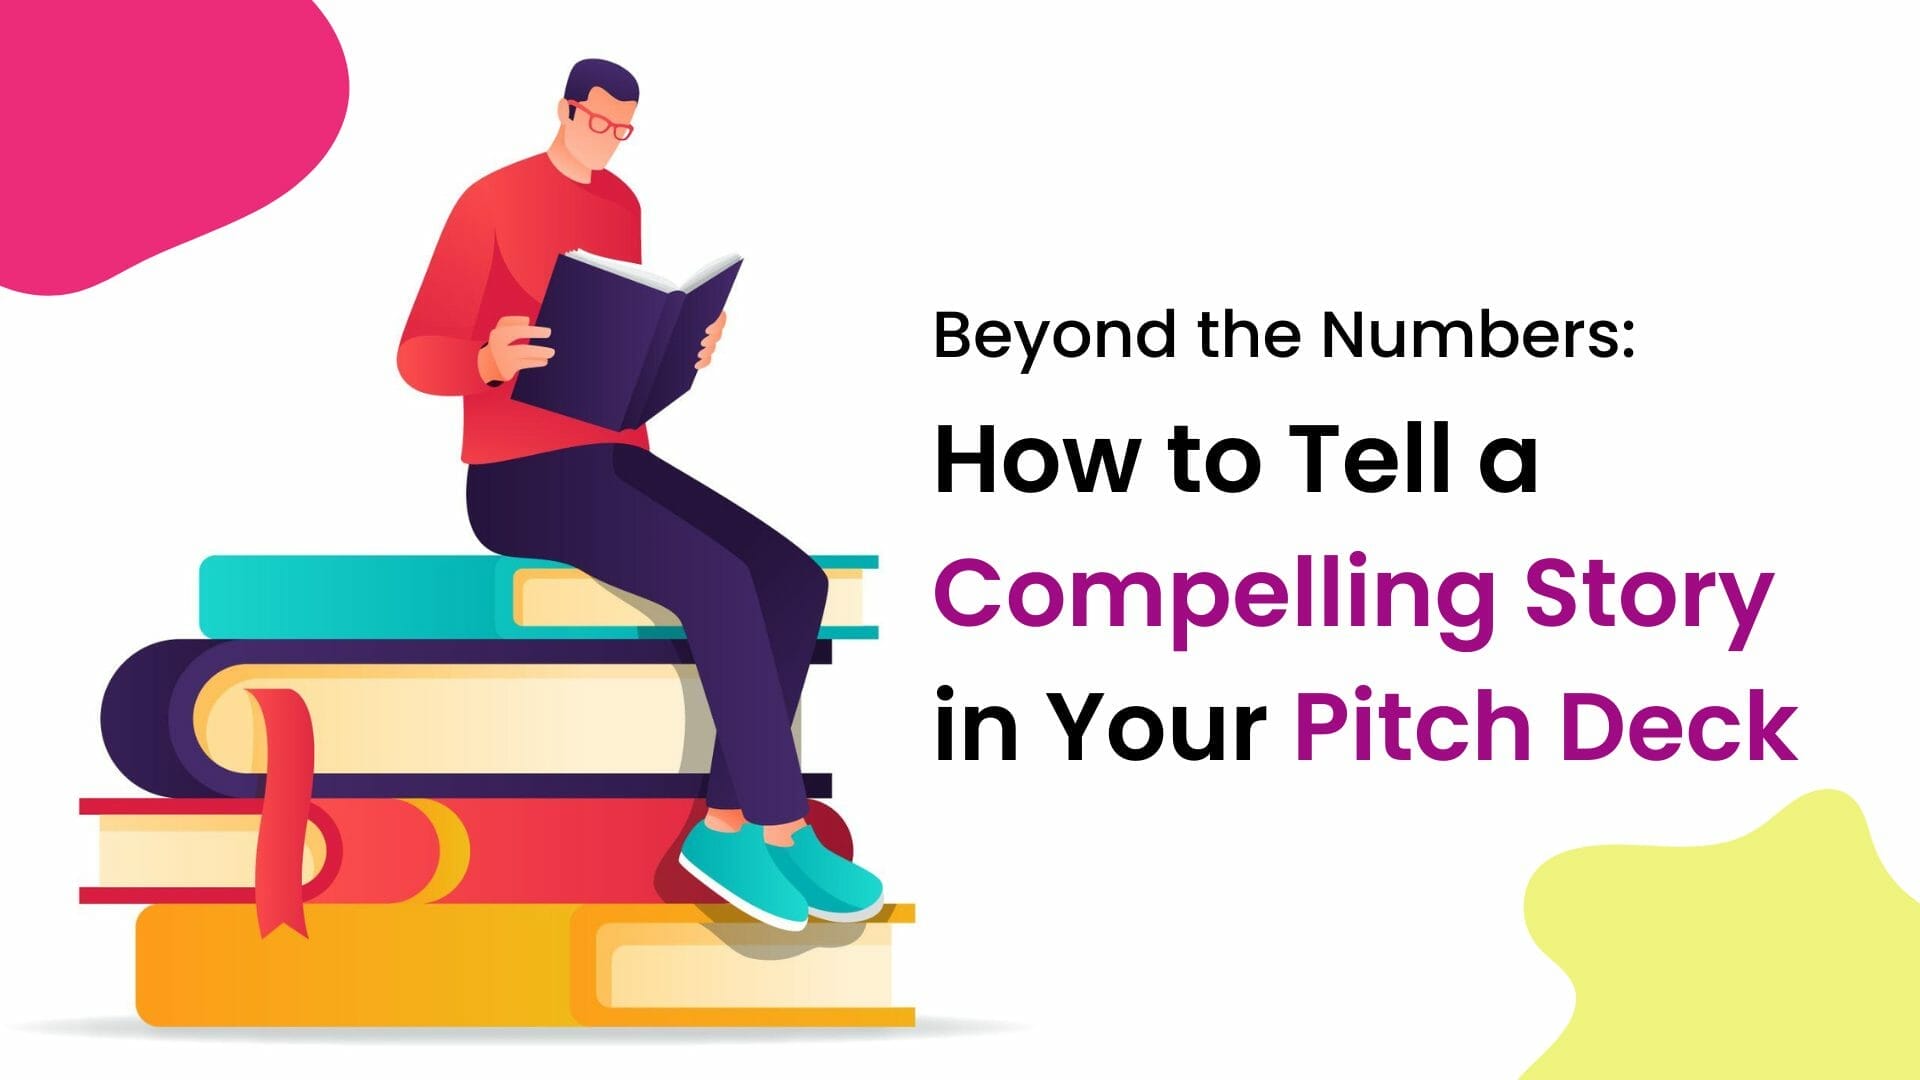 Beyond the Numbers: How to Tell a Compelling Story in Your Pitch Deck